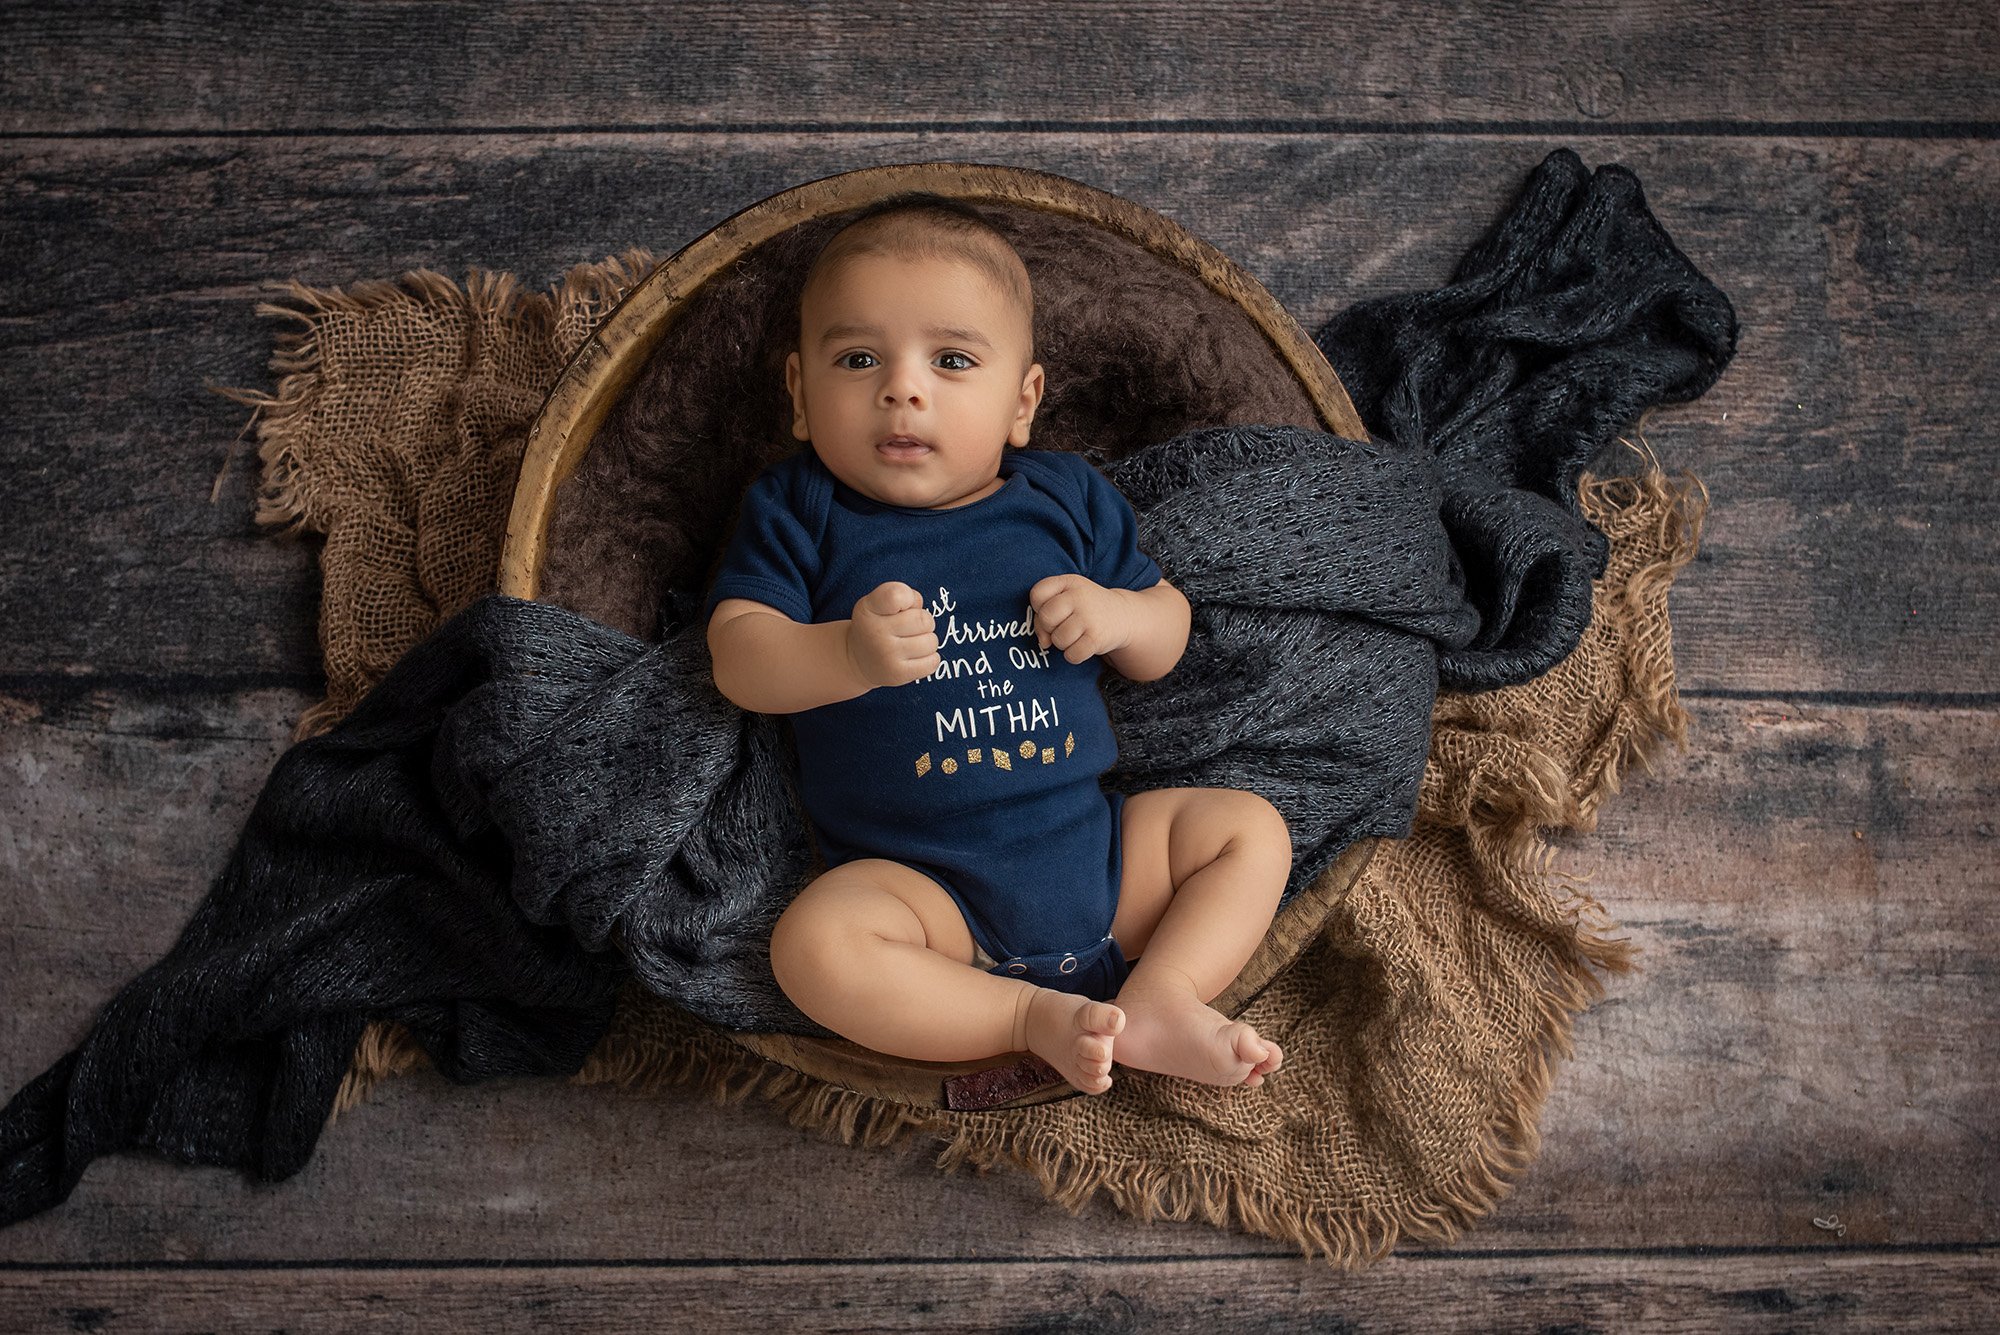 baby portraits 2 month old baby boy wearing navy blue onesie laying inside wooden bowl with blue and brown blankets